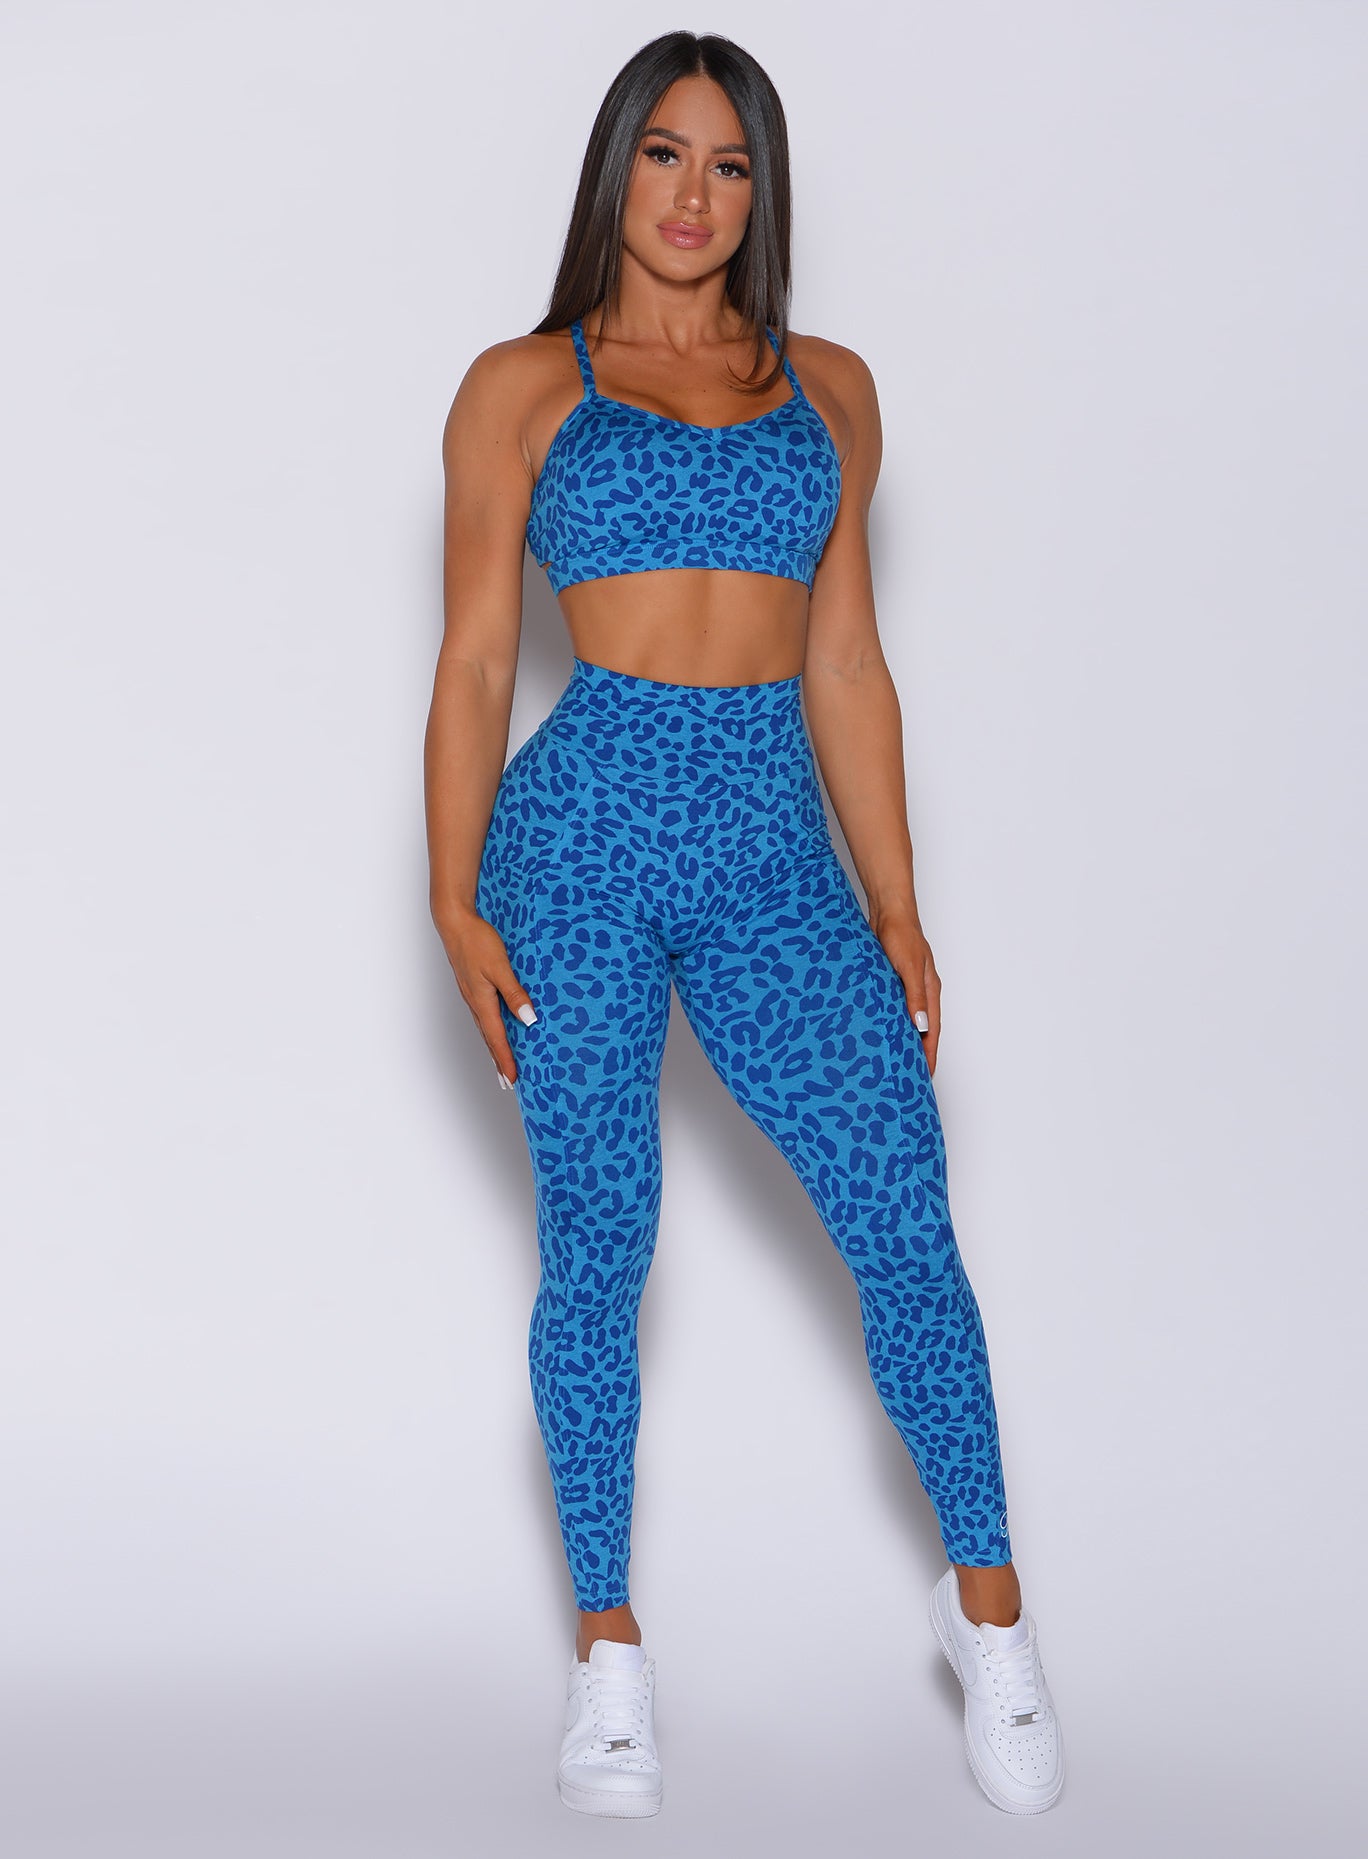 Picture of a model facing forward wearing our curves leggings in blue cheetah color and a matching bra 